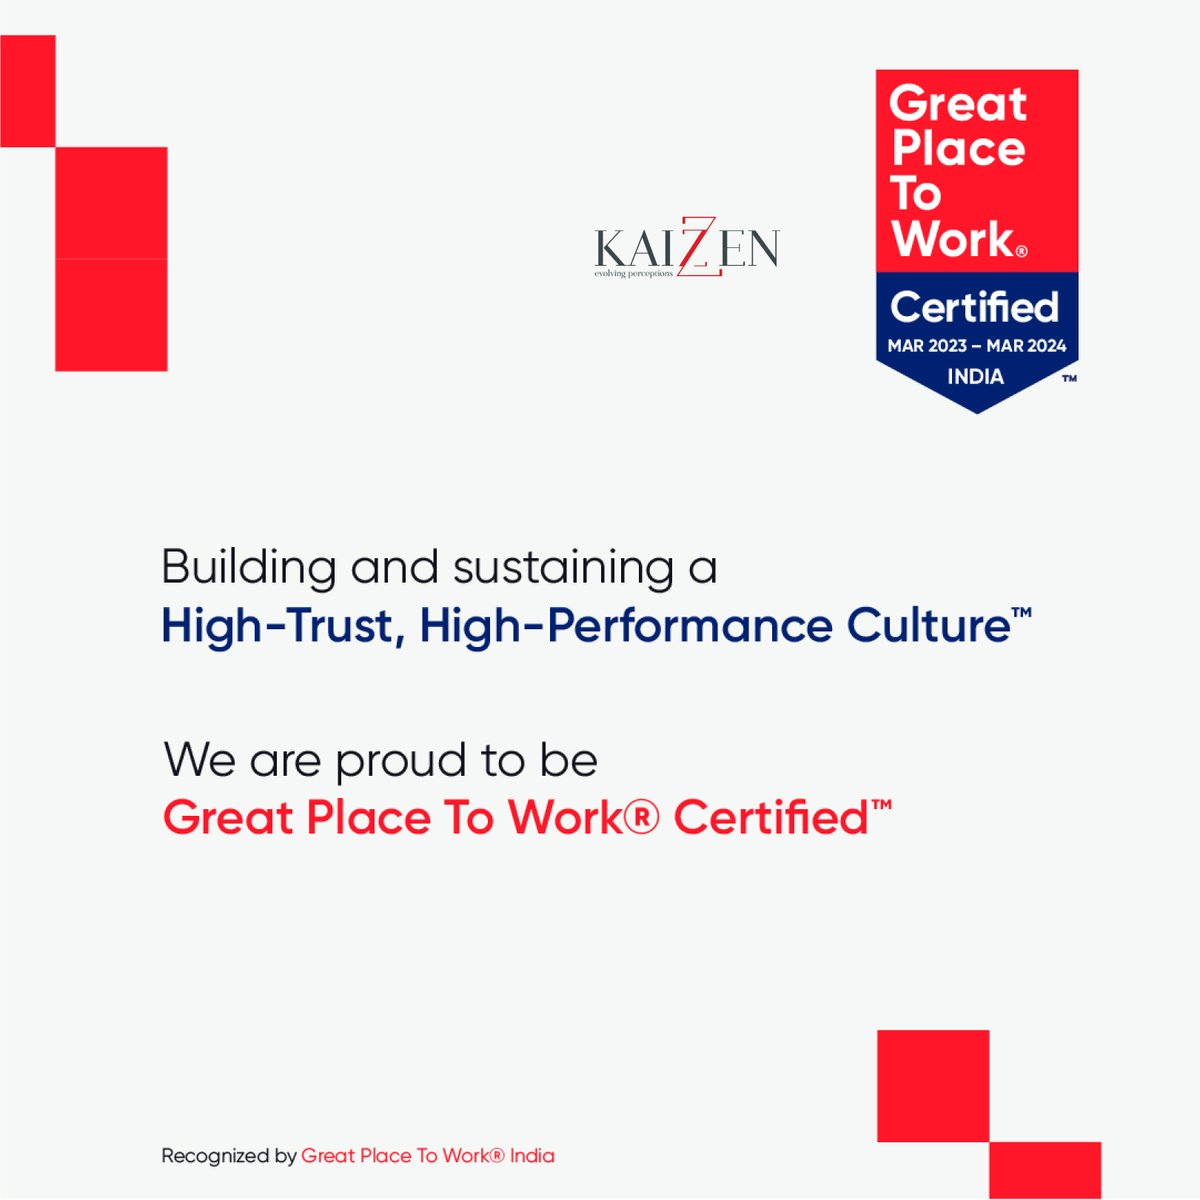 We are proud to announce #Kaizzen has received The #GreatPlaceToWork ®️ #Certification ™️. This is a testament to our commitment towards a positive inclusive workplace. We are #grateful to our #employees for hard work & dedication that helped us achieve this recognition.